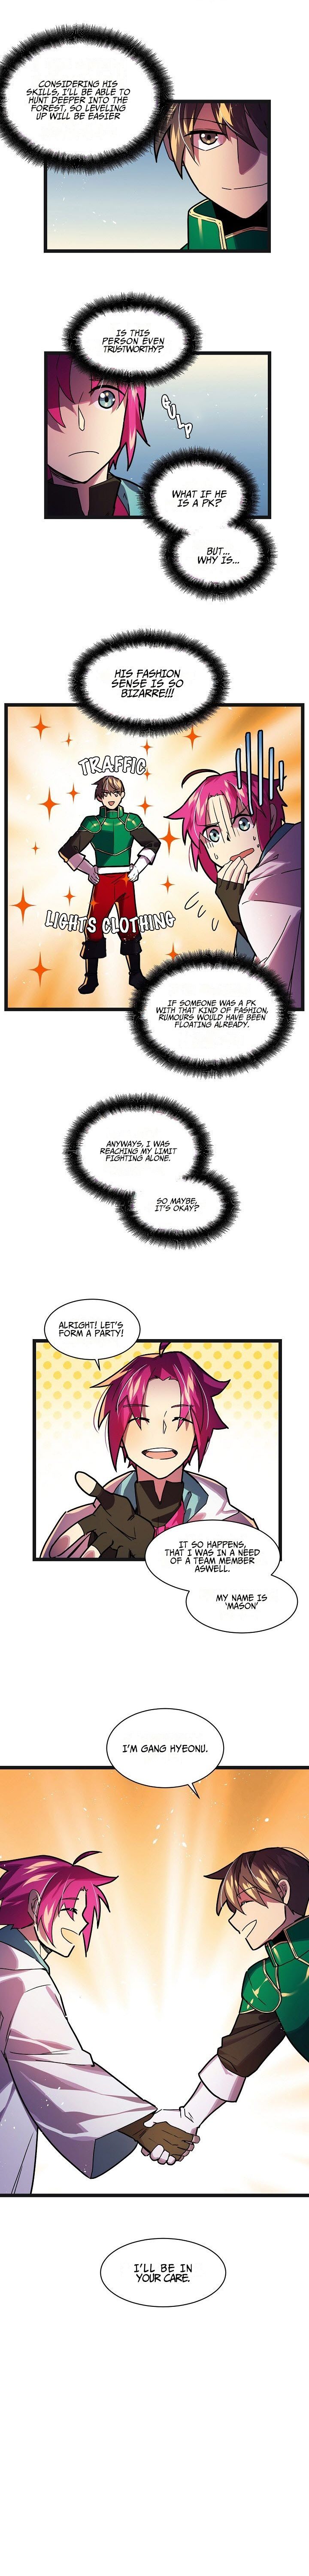 Ranker's Return Chapter 21 page 5